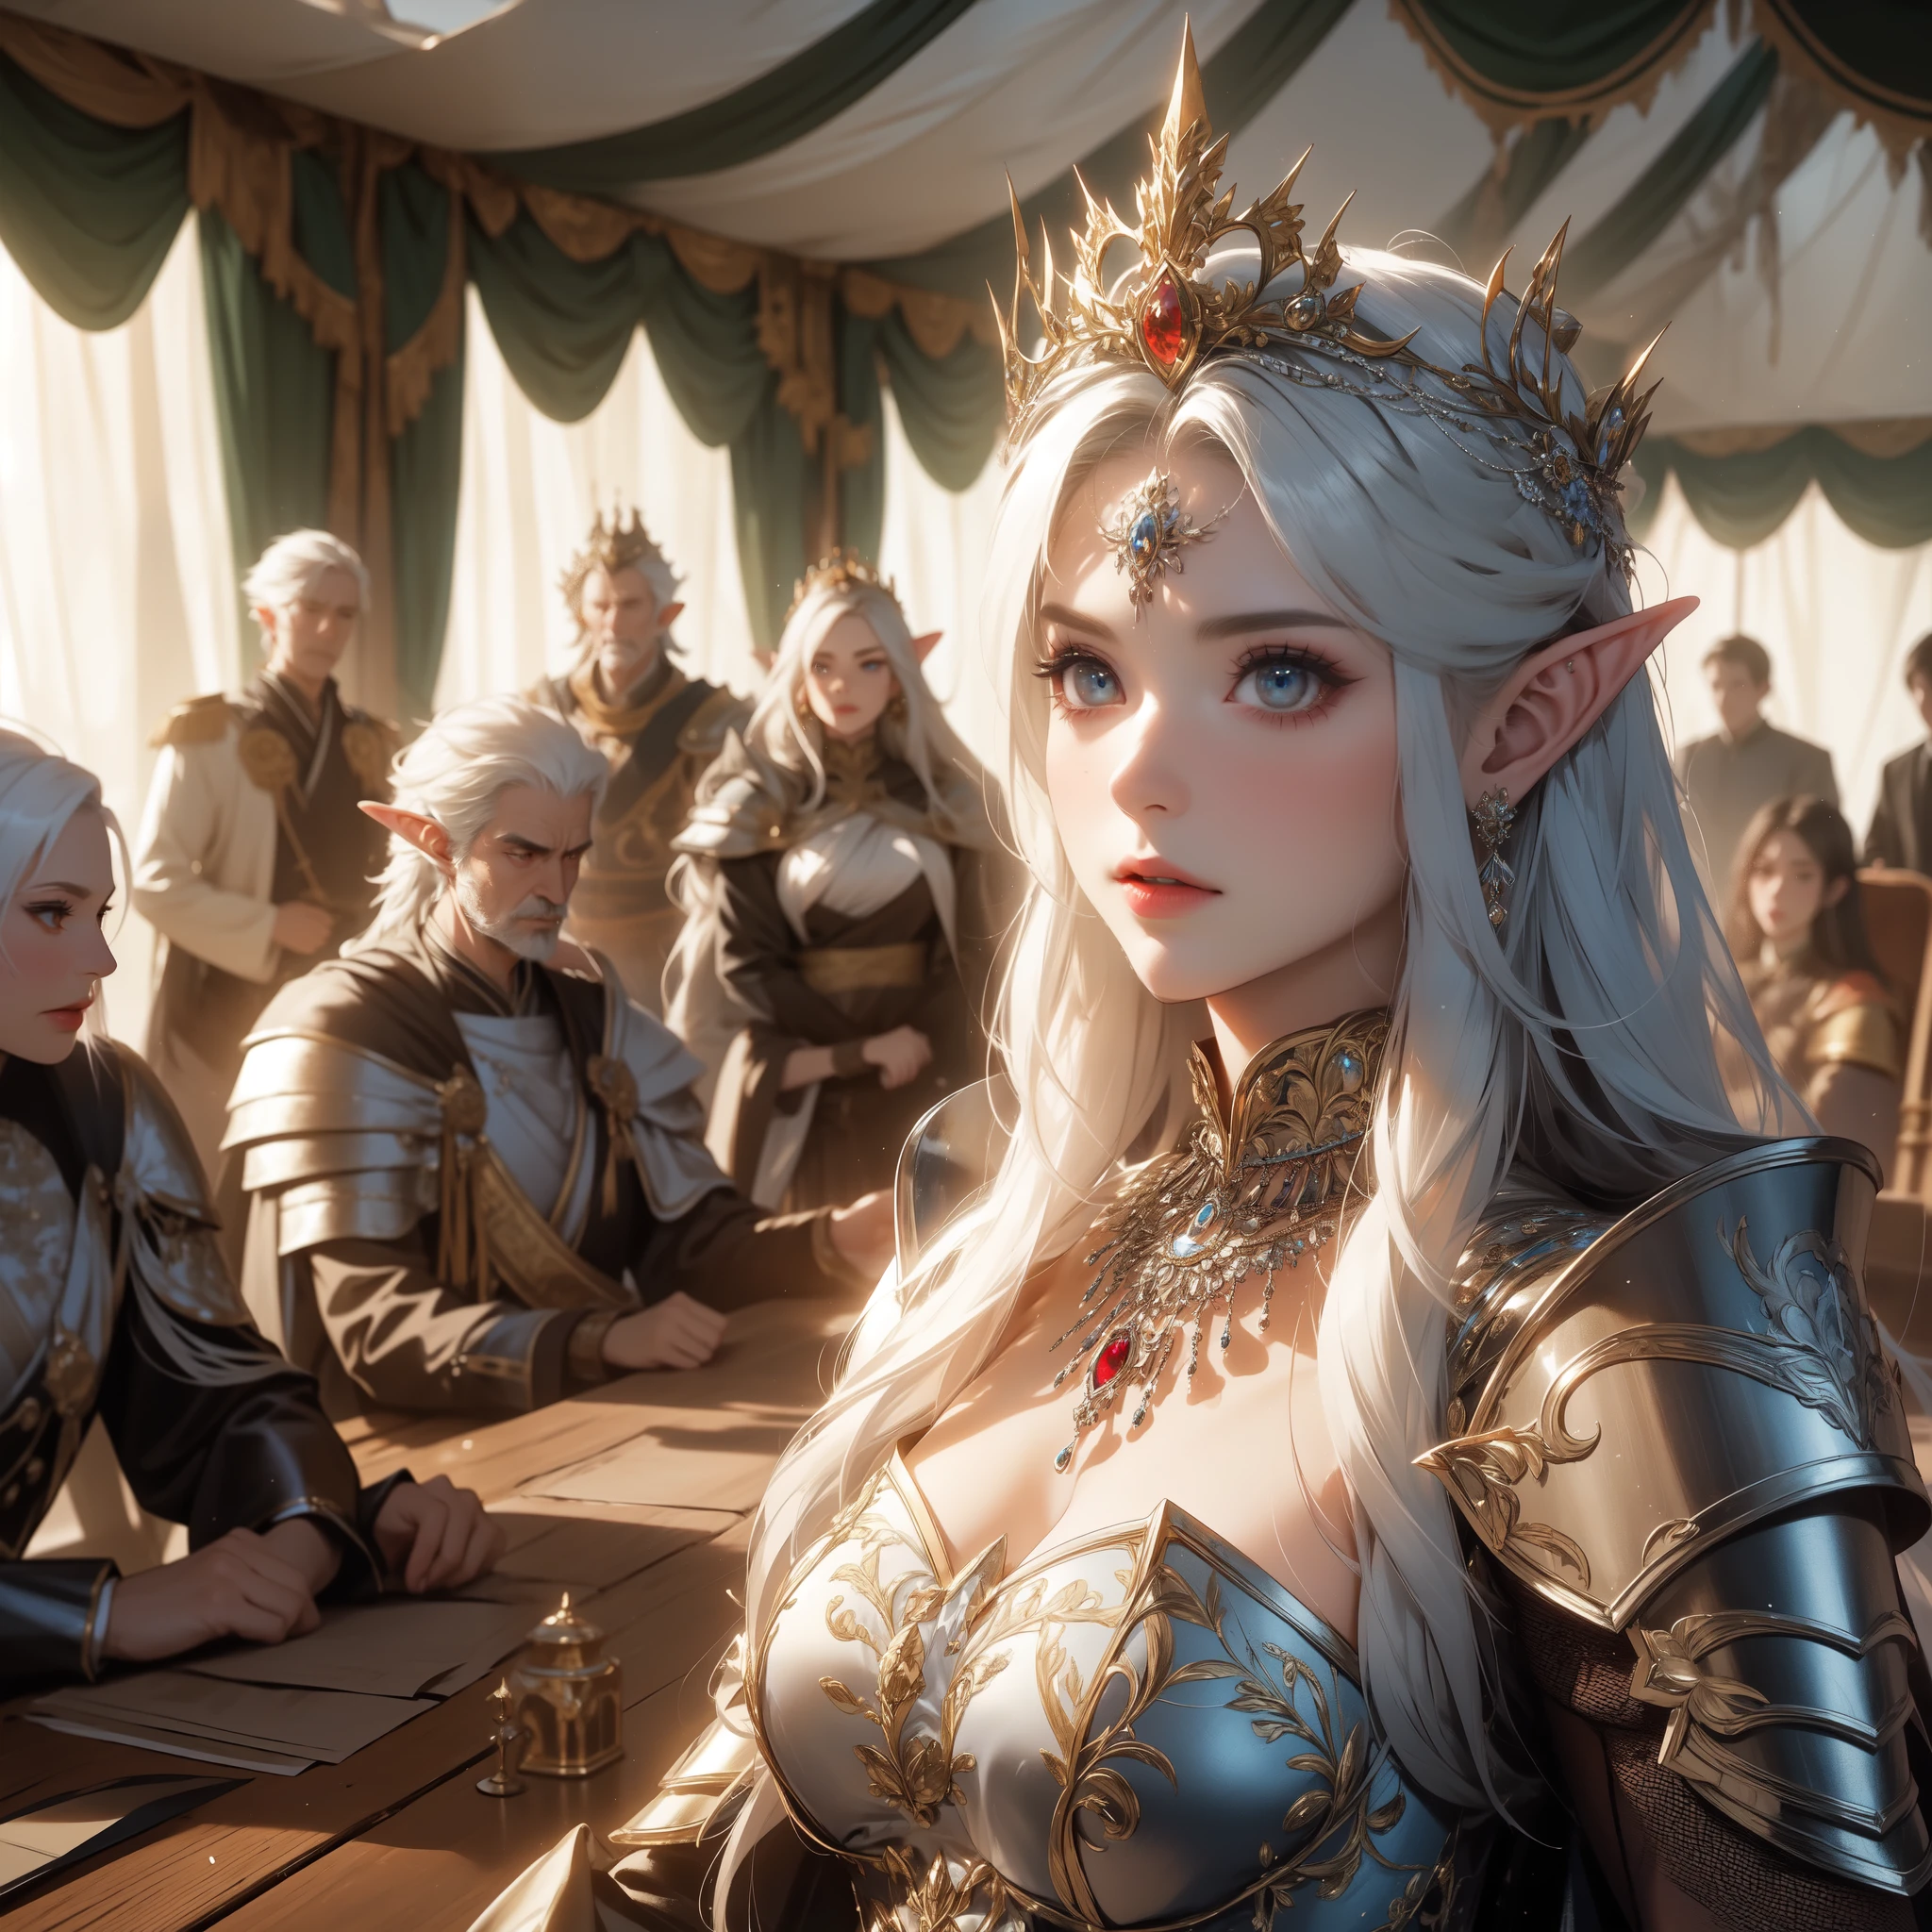 The elven queen, exuding the majestic aura of her regalia and crown that symbolize her authority, stands with beautiful white hair and piercing blue eyes, dressed in knightly attire. She presides over a strategy meeting, seated at the center of the table. To her left stands the aide, and to her right stands the general, all gathered around the table as they discuss important matters of the realm, holding a meeting with her generals and aides gathered in the tent at her side. by Artgem, Dynamic shot, Dynamic pose, by Yoshitaka Amano, Mikimoto Haruhiko, frank frazetta, Cinematic Dramatic atmosphere, dark atmosfer, fantasy, 8k.